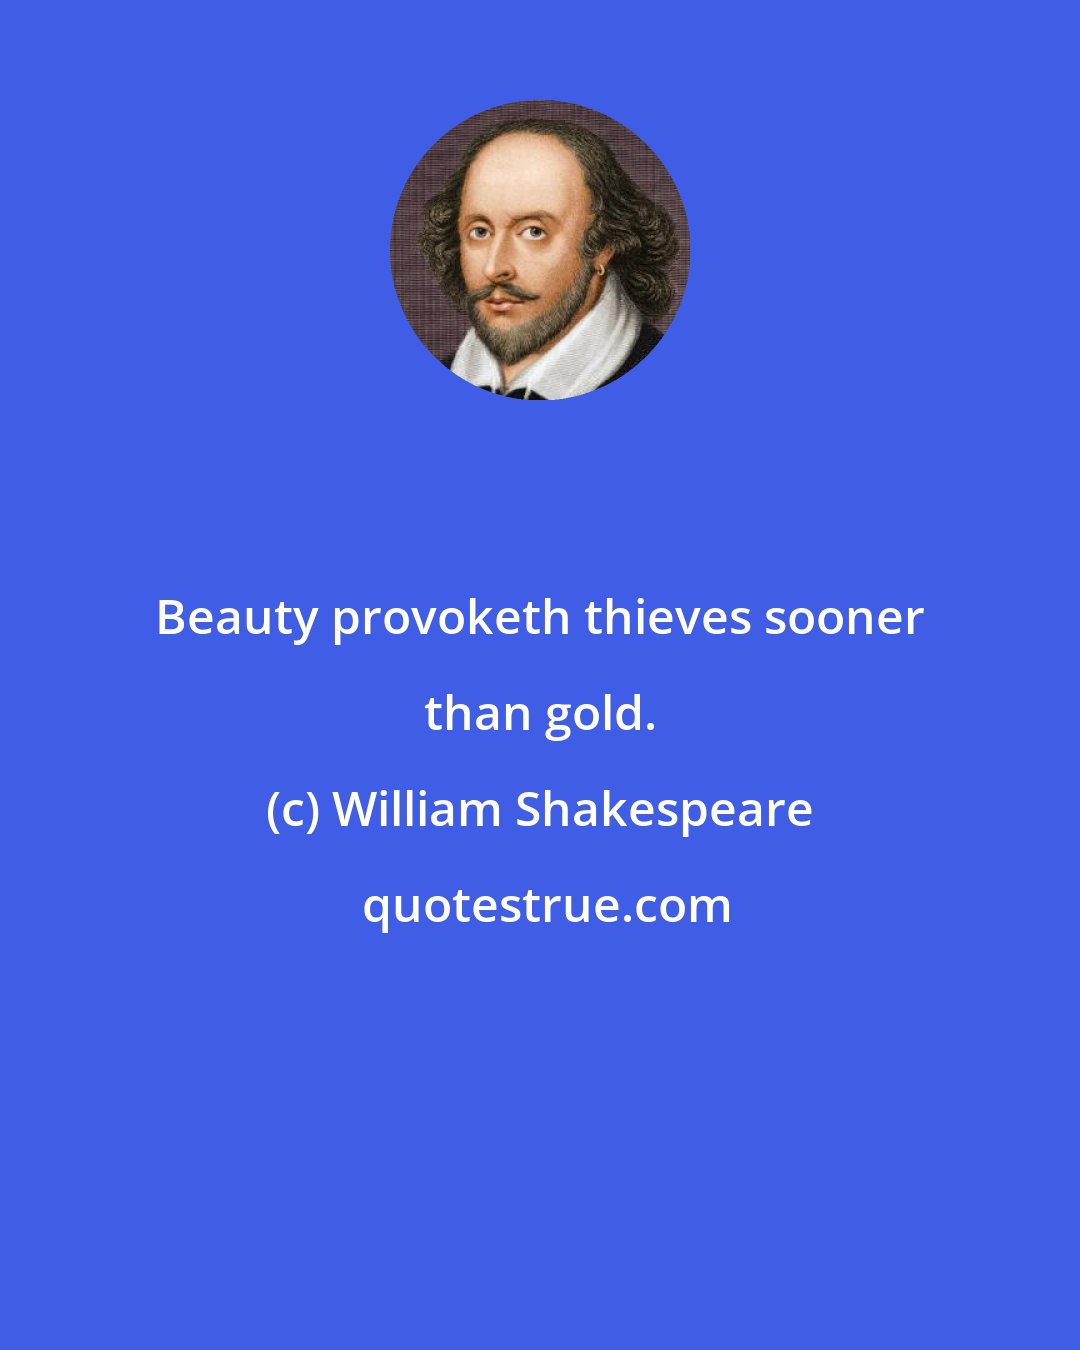 William Shakespeare: Beauty provoketh thieves sooner than gold.